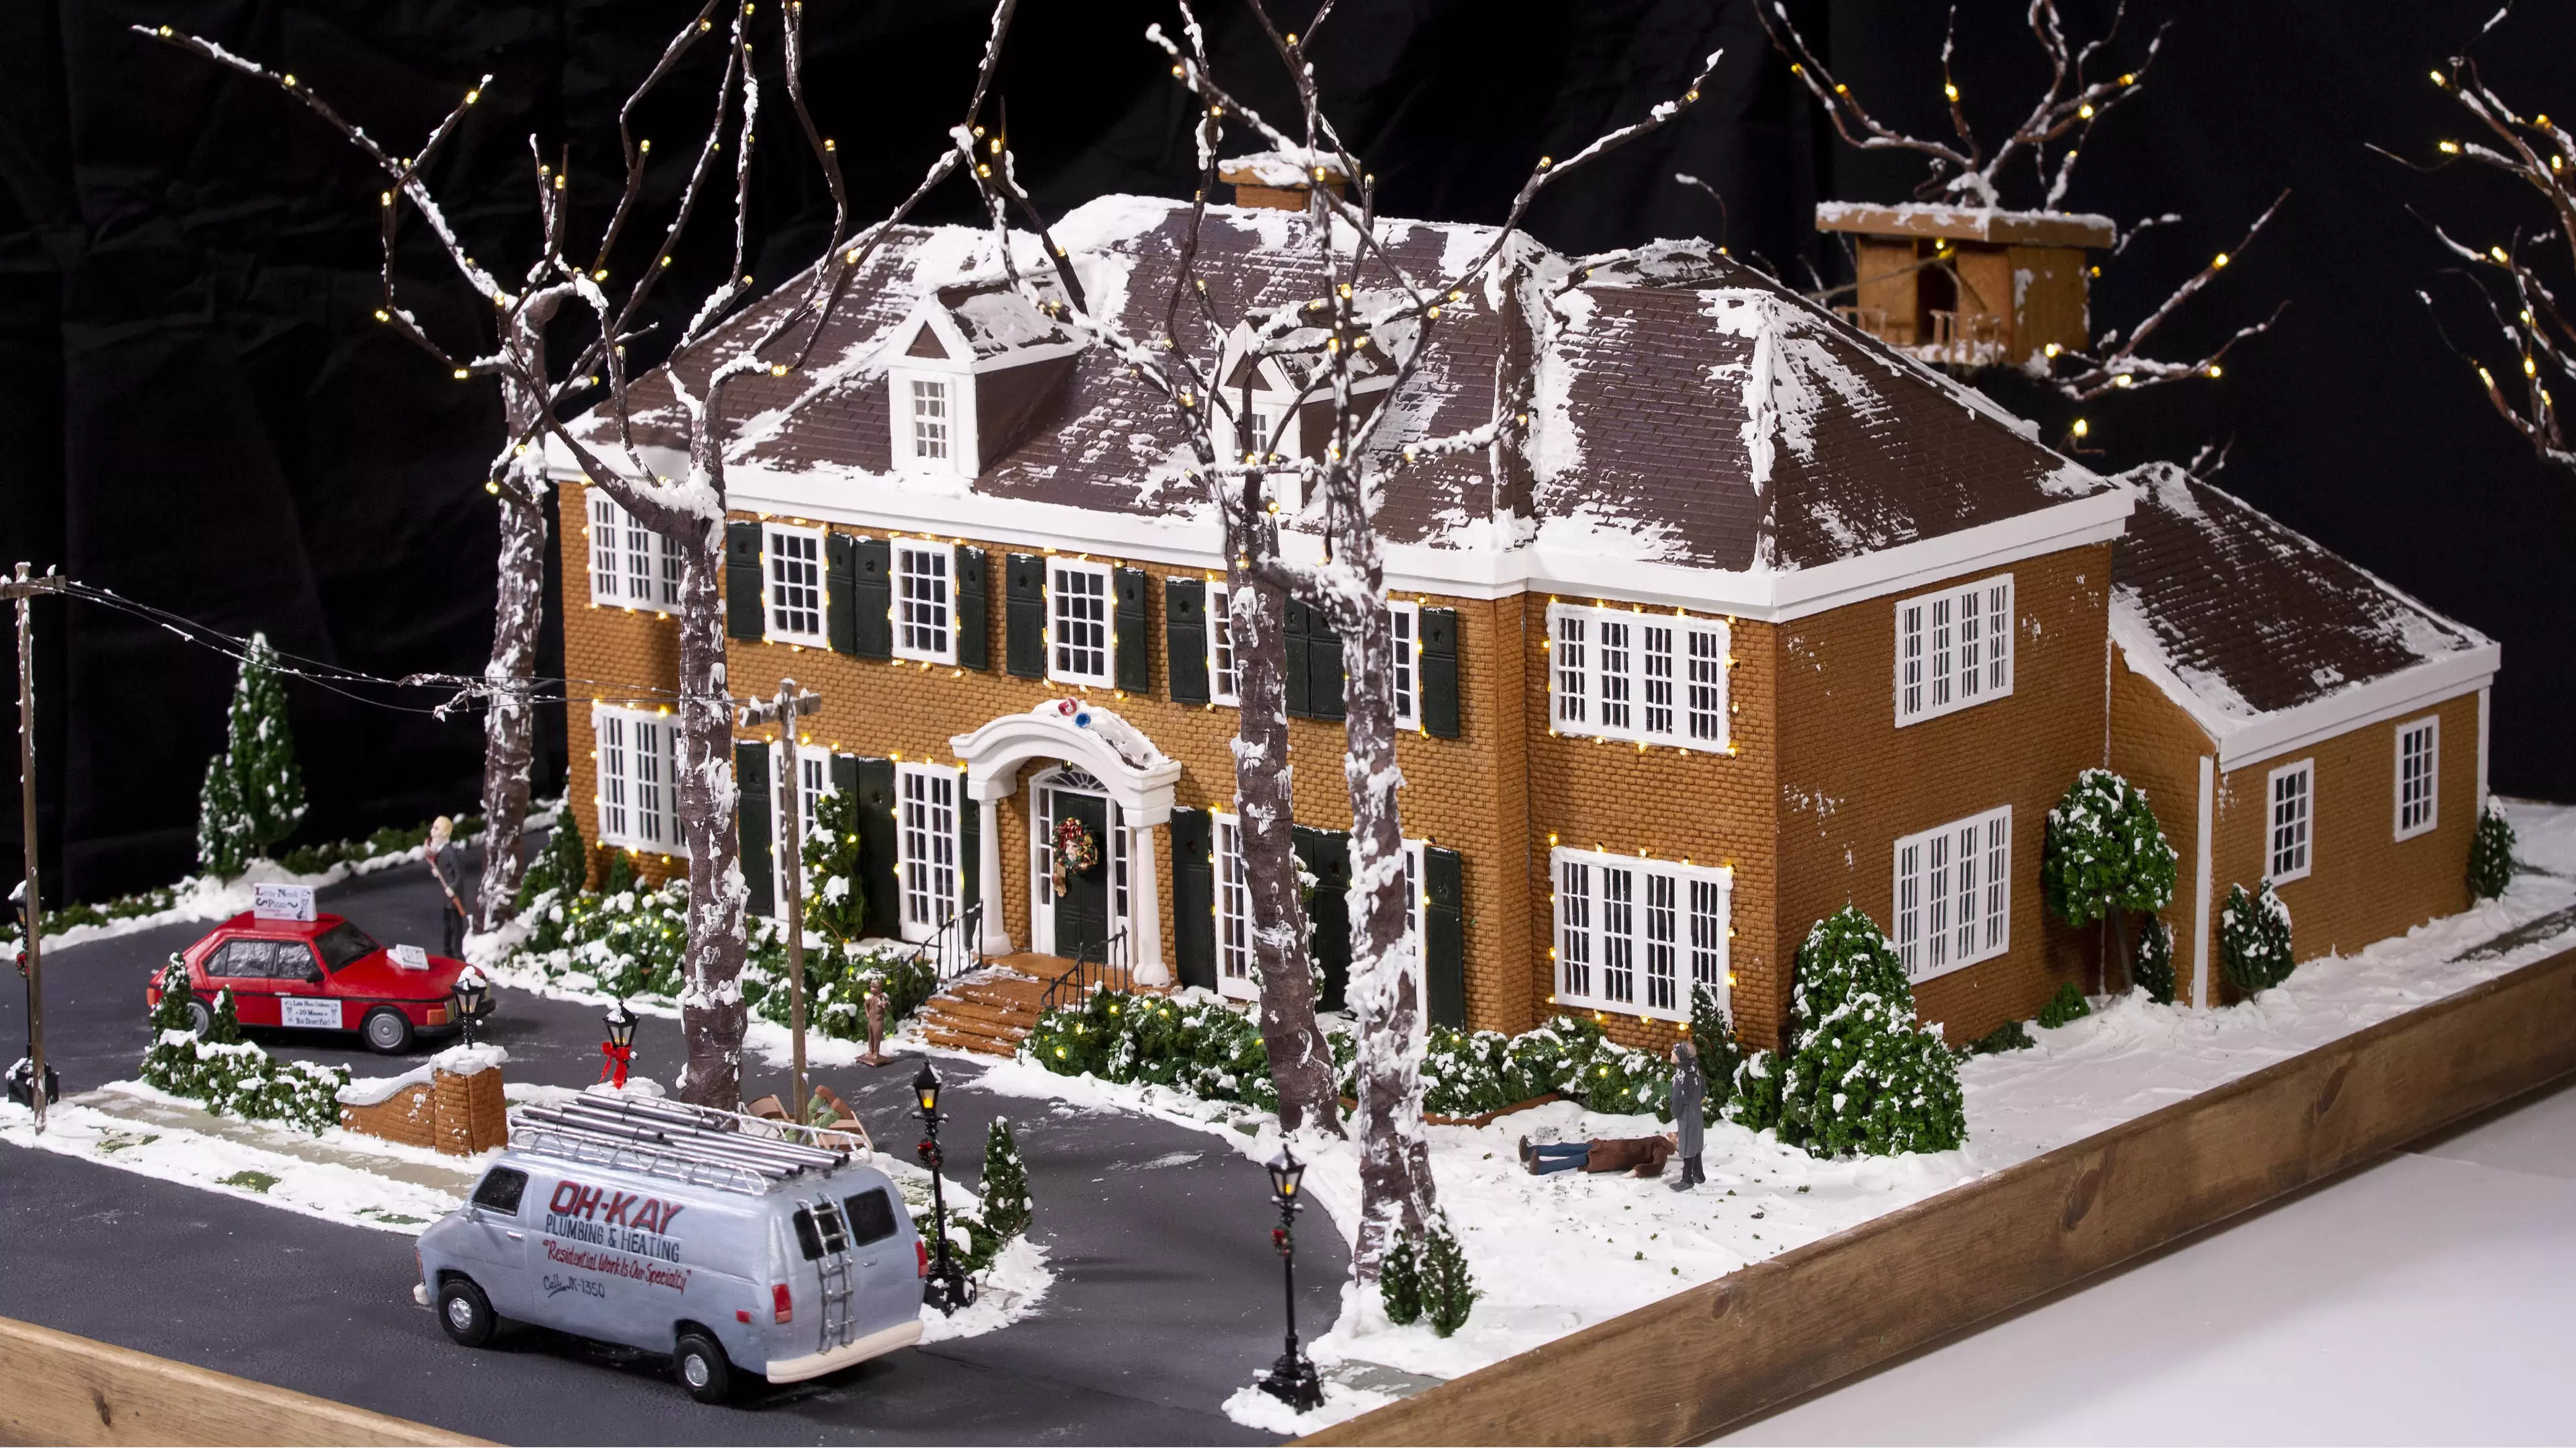 Home Alone House Recreated In Gingerbread To Mark 30th Anniversary